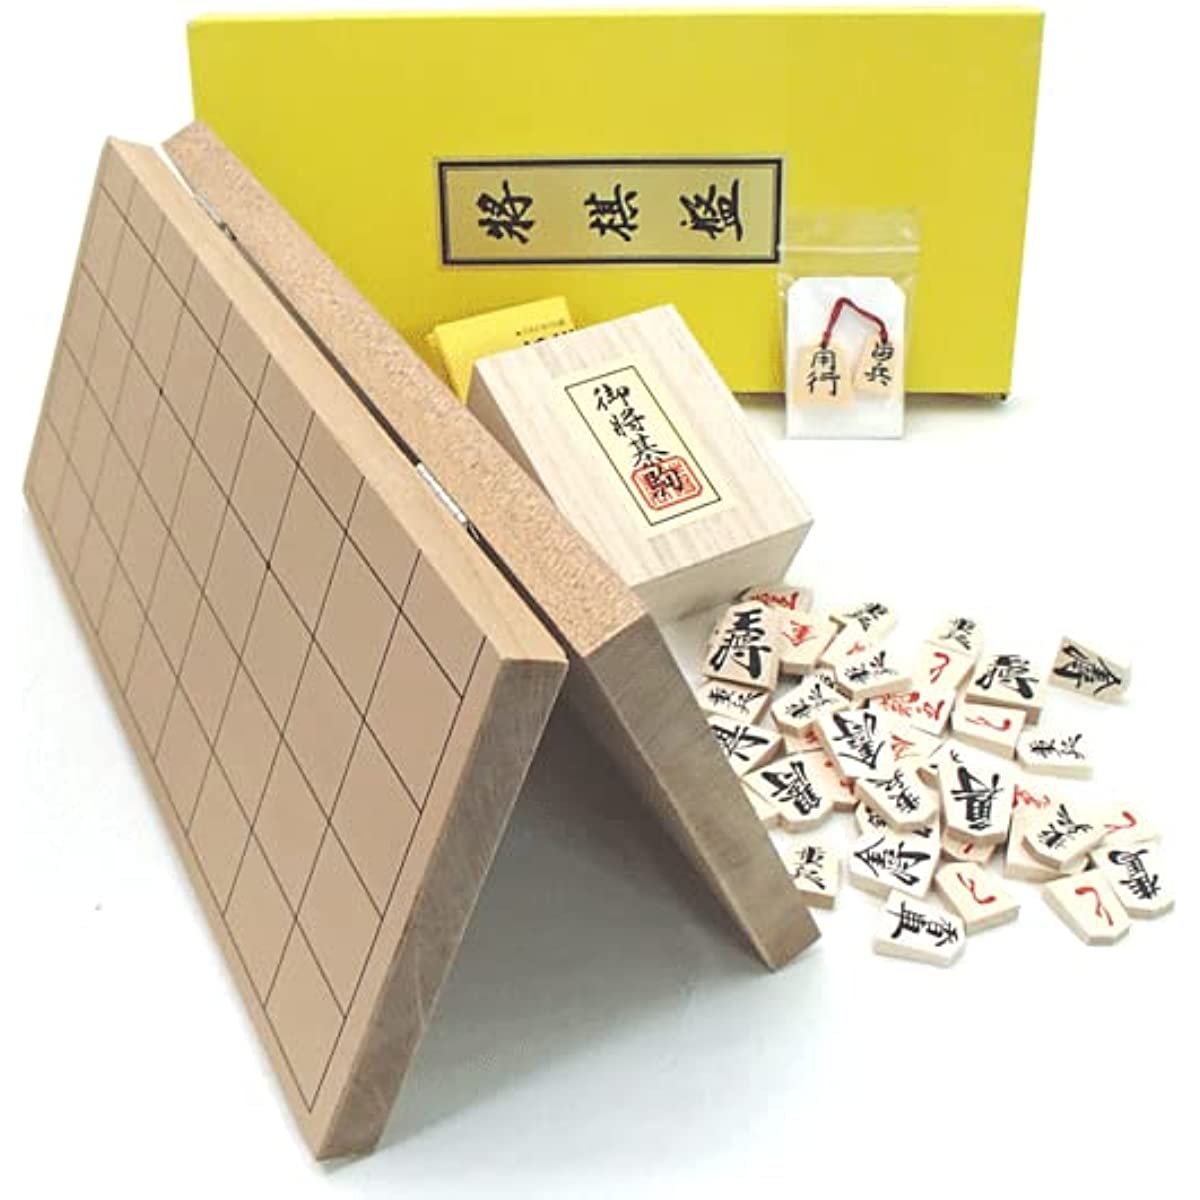 Wooden Shogi Board with Plastic Pieces